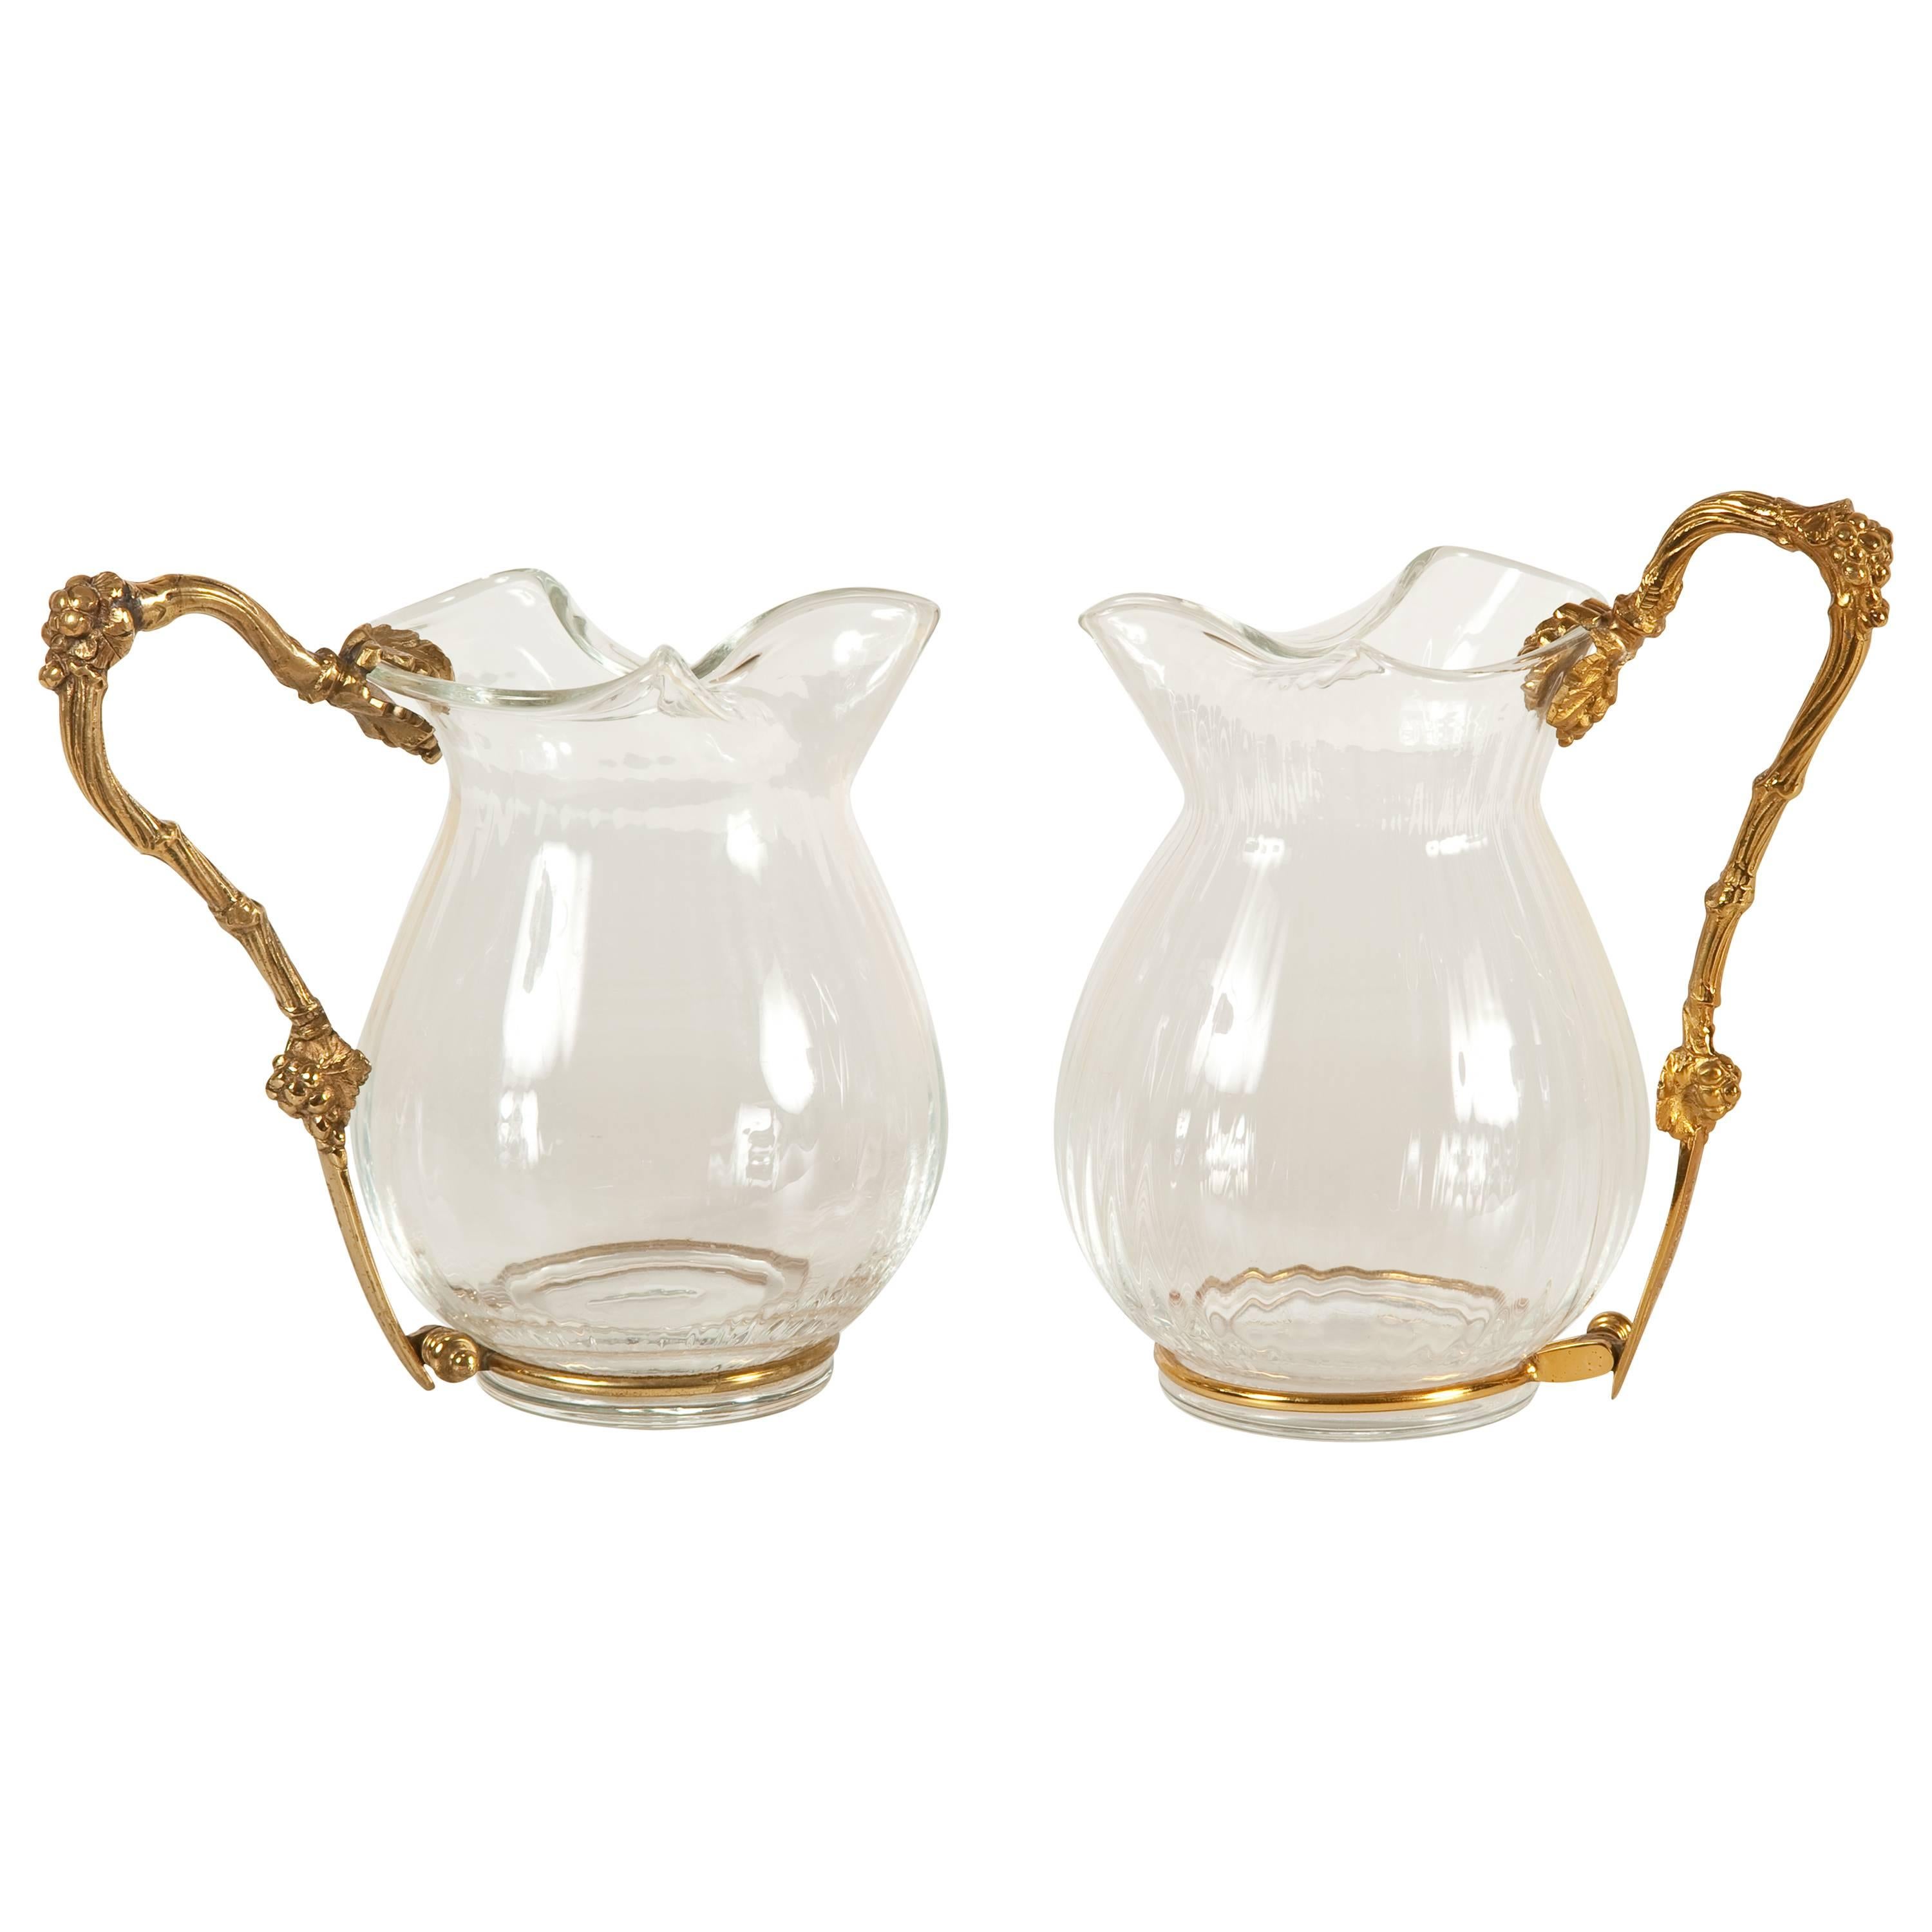 Pair of Water Pitcher by Gabriella Crespi